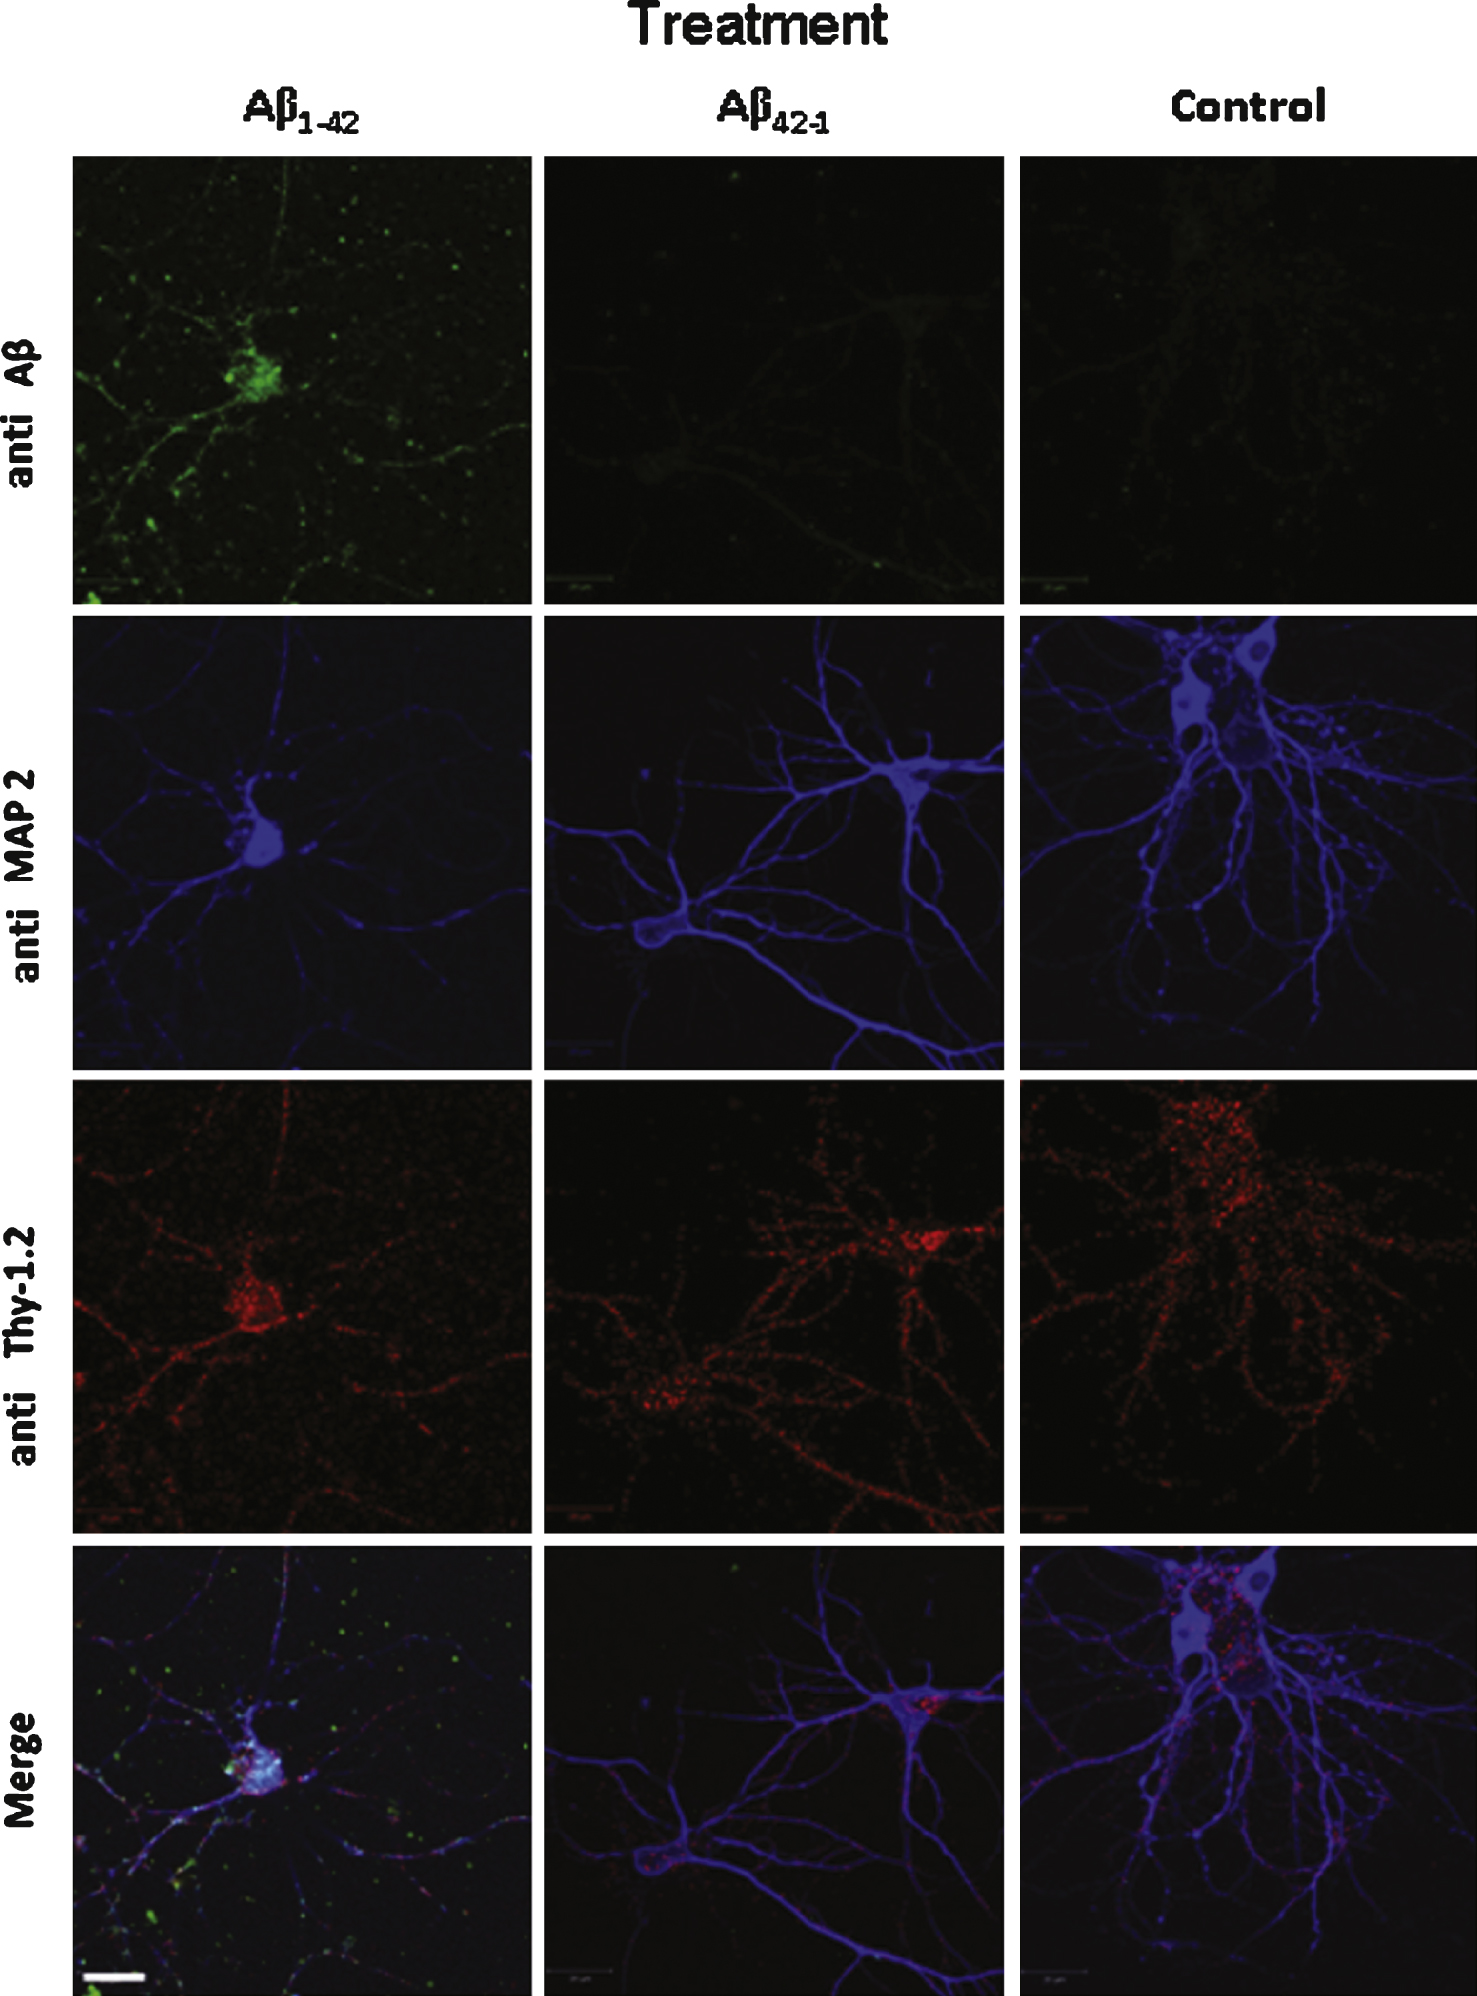 Aβ42 binds and partially colocalizes with Thy1 on the surface of cultured neurons. Aβ1–42 immunochemical detection on cultured mouse cortical neurons. Cells were incubated either with 1 μM Aβ1–42 or with 1 μM Ab42–1 as a control or with the vehicle solution prior to fixation. Aβ1–42 was revealed by the 6E10 monoclonal antibody (green) and two other neuronal markers were used to characterize the neuronal phenotype of the cells: Thy-1 (red), which is a membrane marker, and MAP2 (blue), a cytoplasmic marker. No Aβ label was detected in control conditions (vehicle solution applied to the cells). Calibration bar 20 μm.